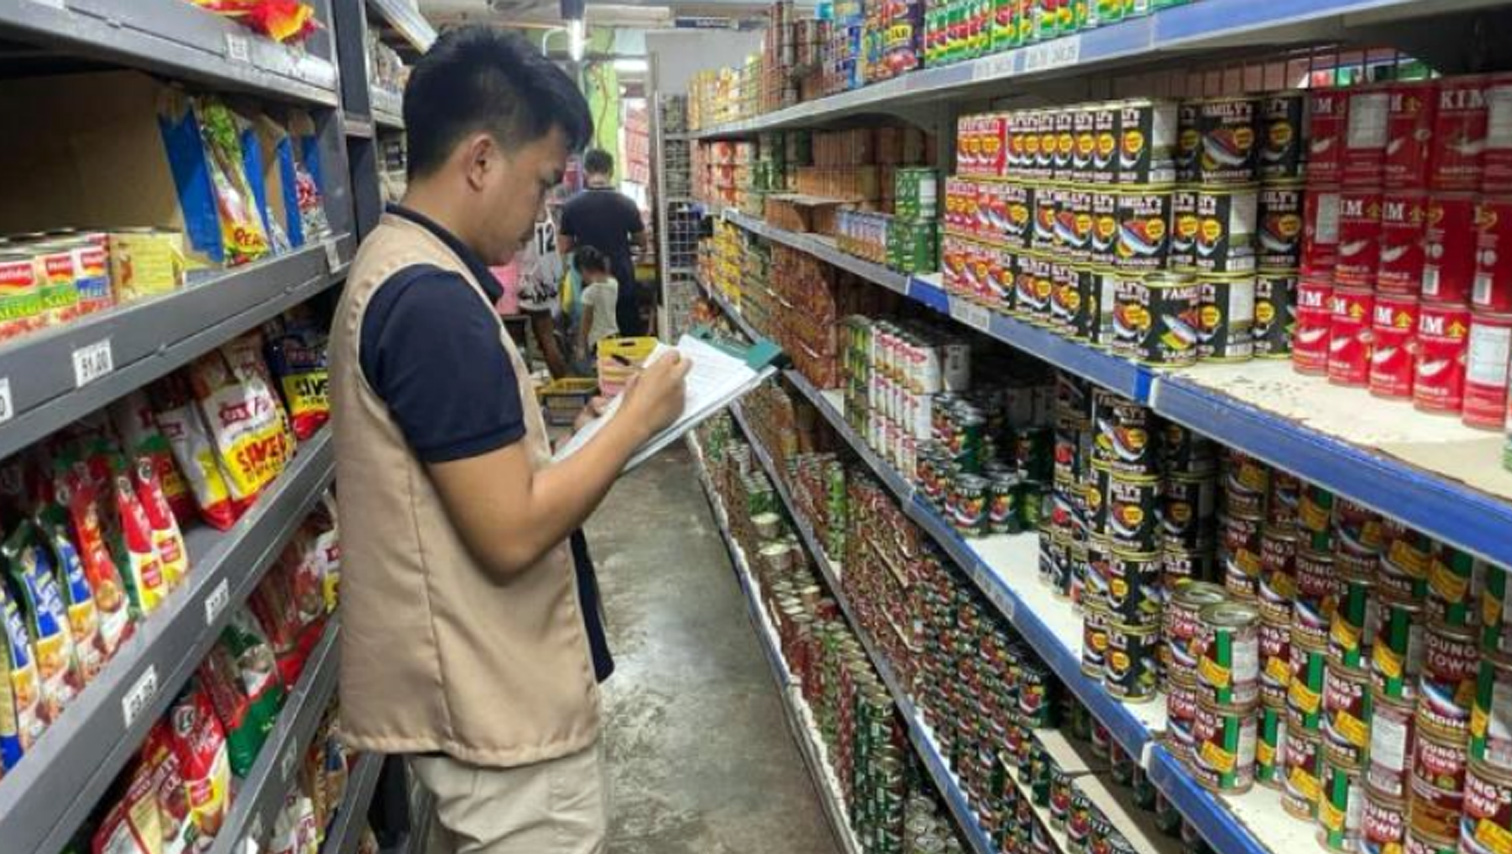 DTI implements price freeze on basic goods in Cagayan de Oro